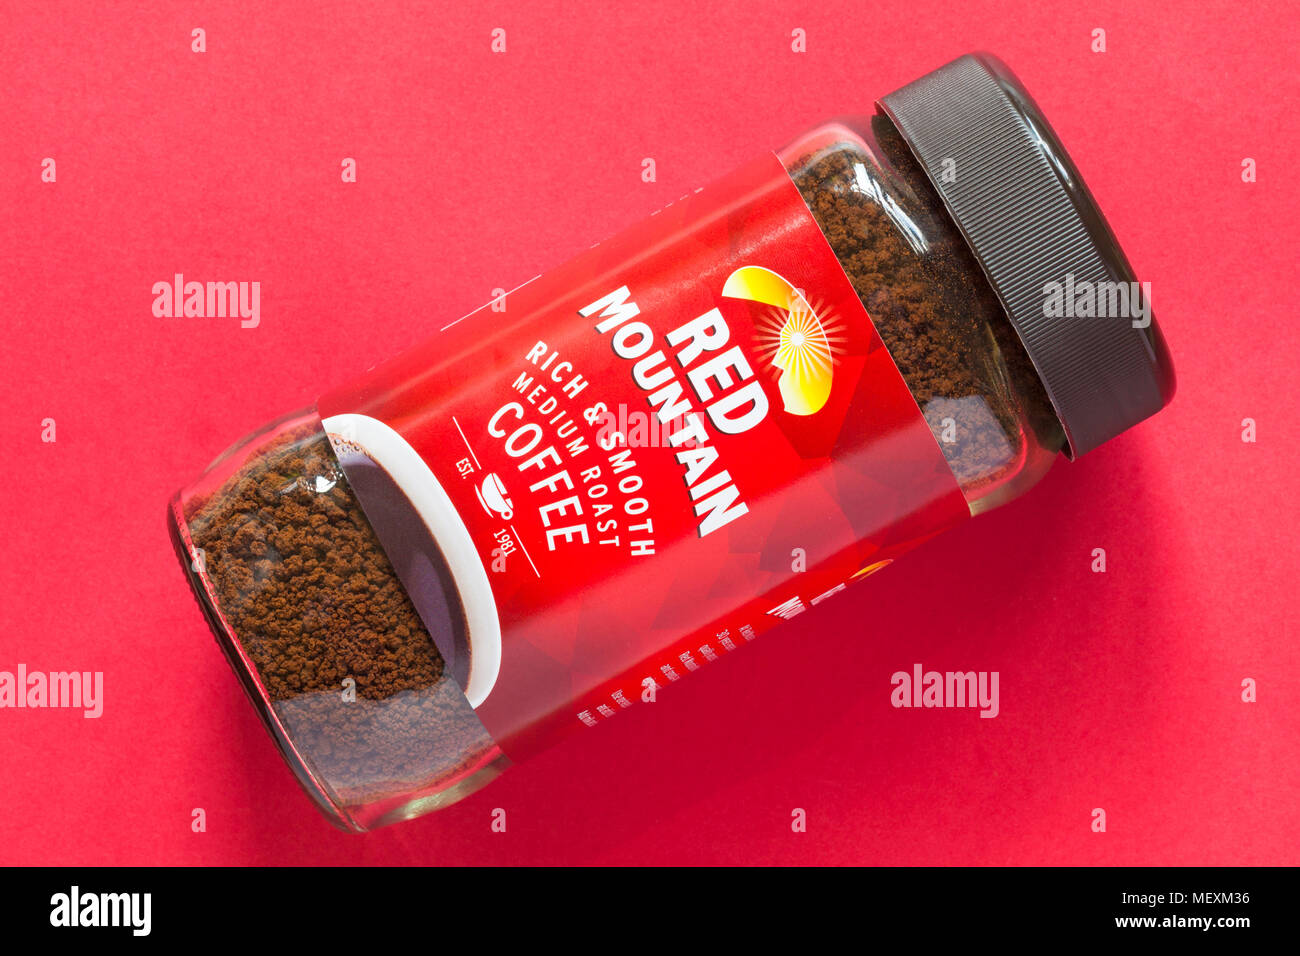 Jar of Red Mountain rich & smooth medium roast coffee isolated on red background Stock Photo